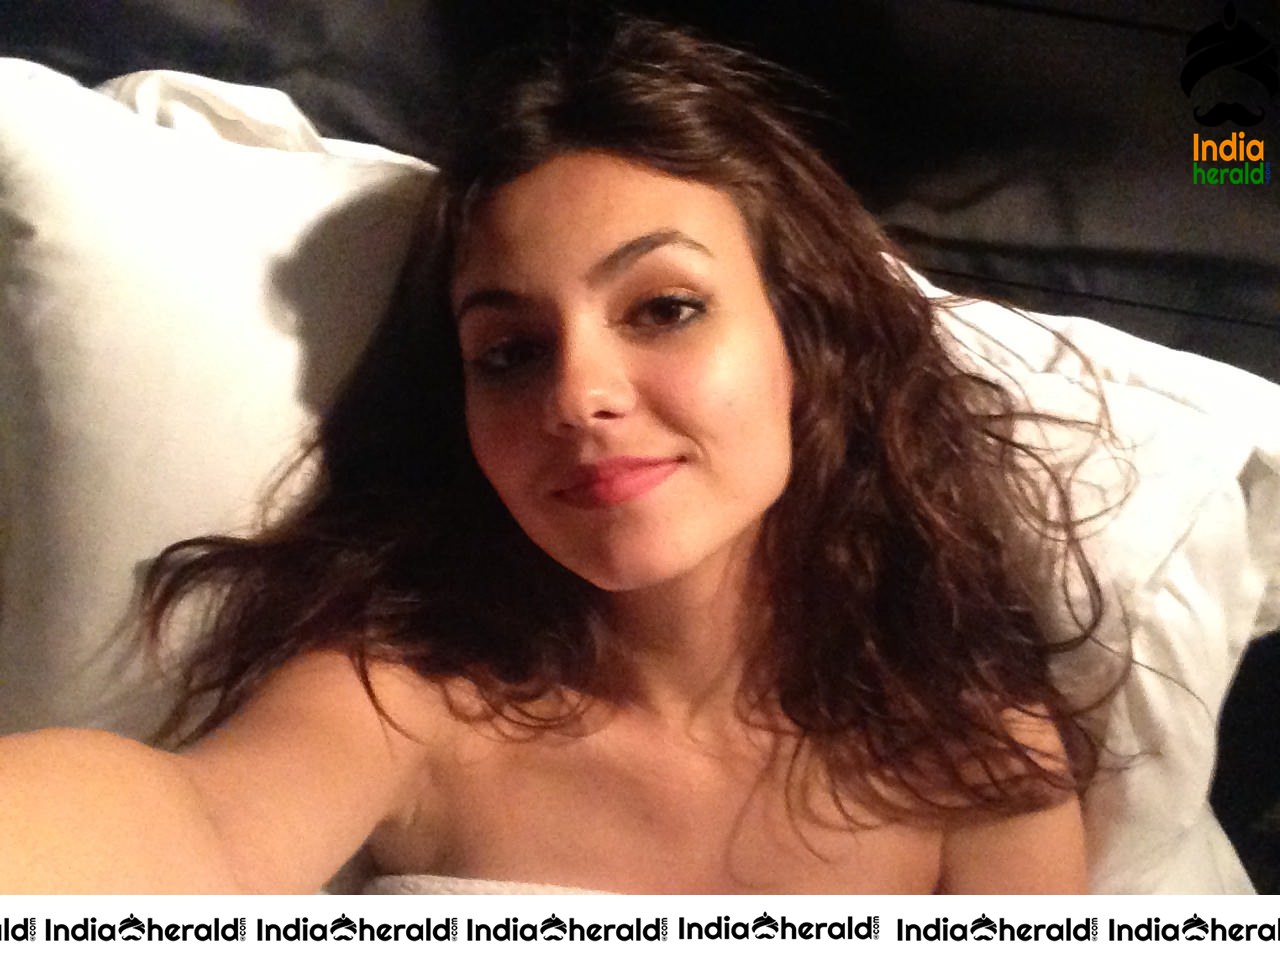 Victoria Justice Unseen Leaked Photos from Social Media